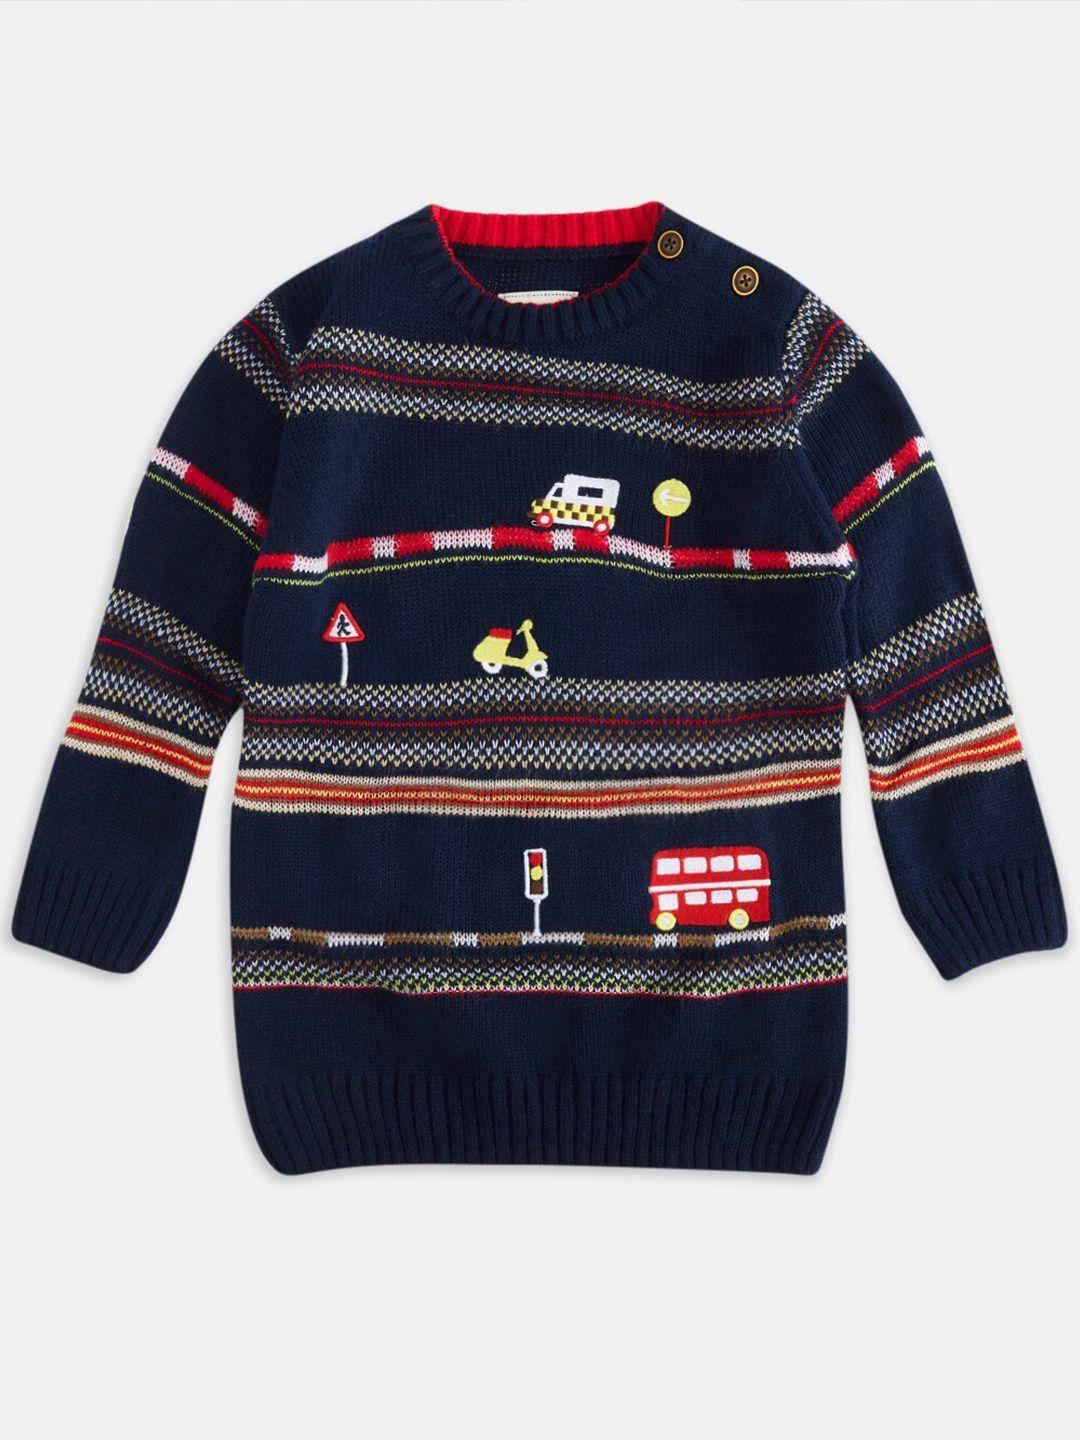 pantaloons baby boys navy blue & red embroidered pullover sweater